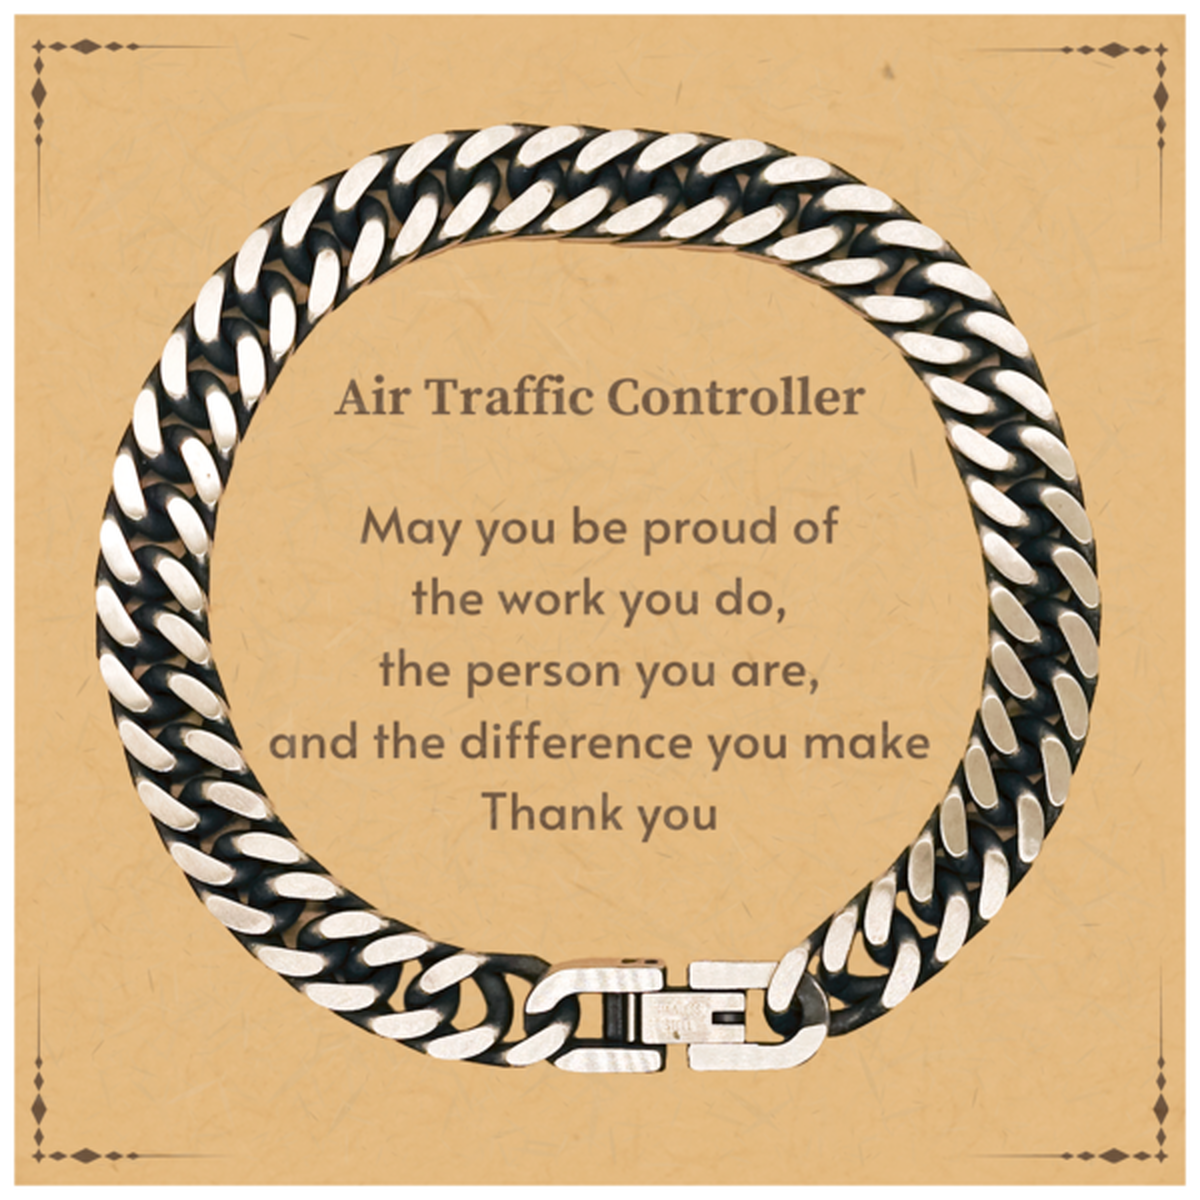 Heartwarming Cuban Link Chain Bracelet Retirement Coworkers Gifts for Air Traffic Controller, Air Traffic Controller May You be proud of the work you do, the person you are Gifts for Boss Men Women Friends